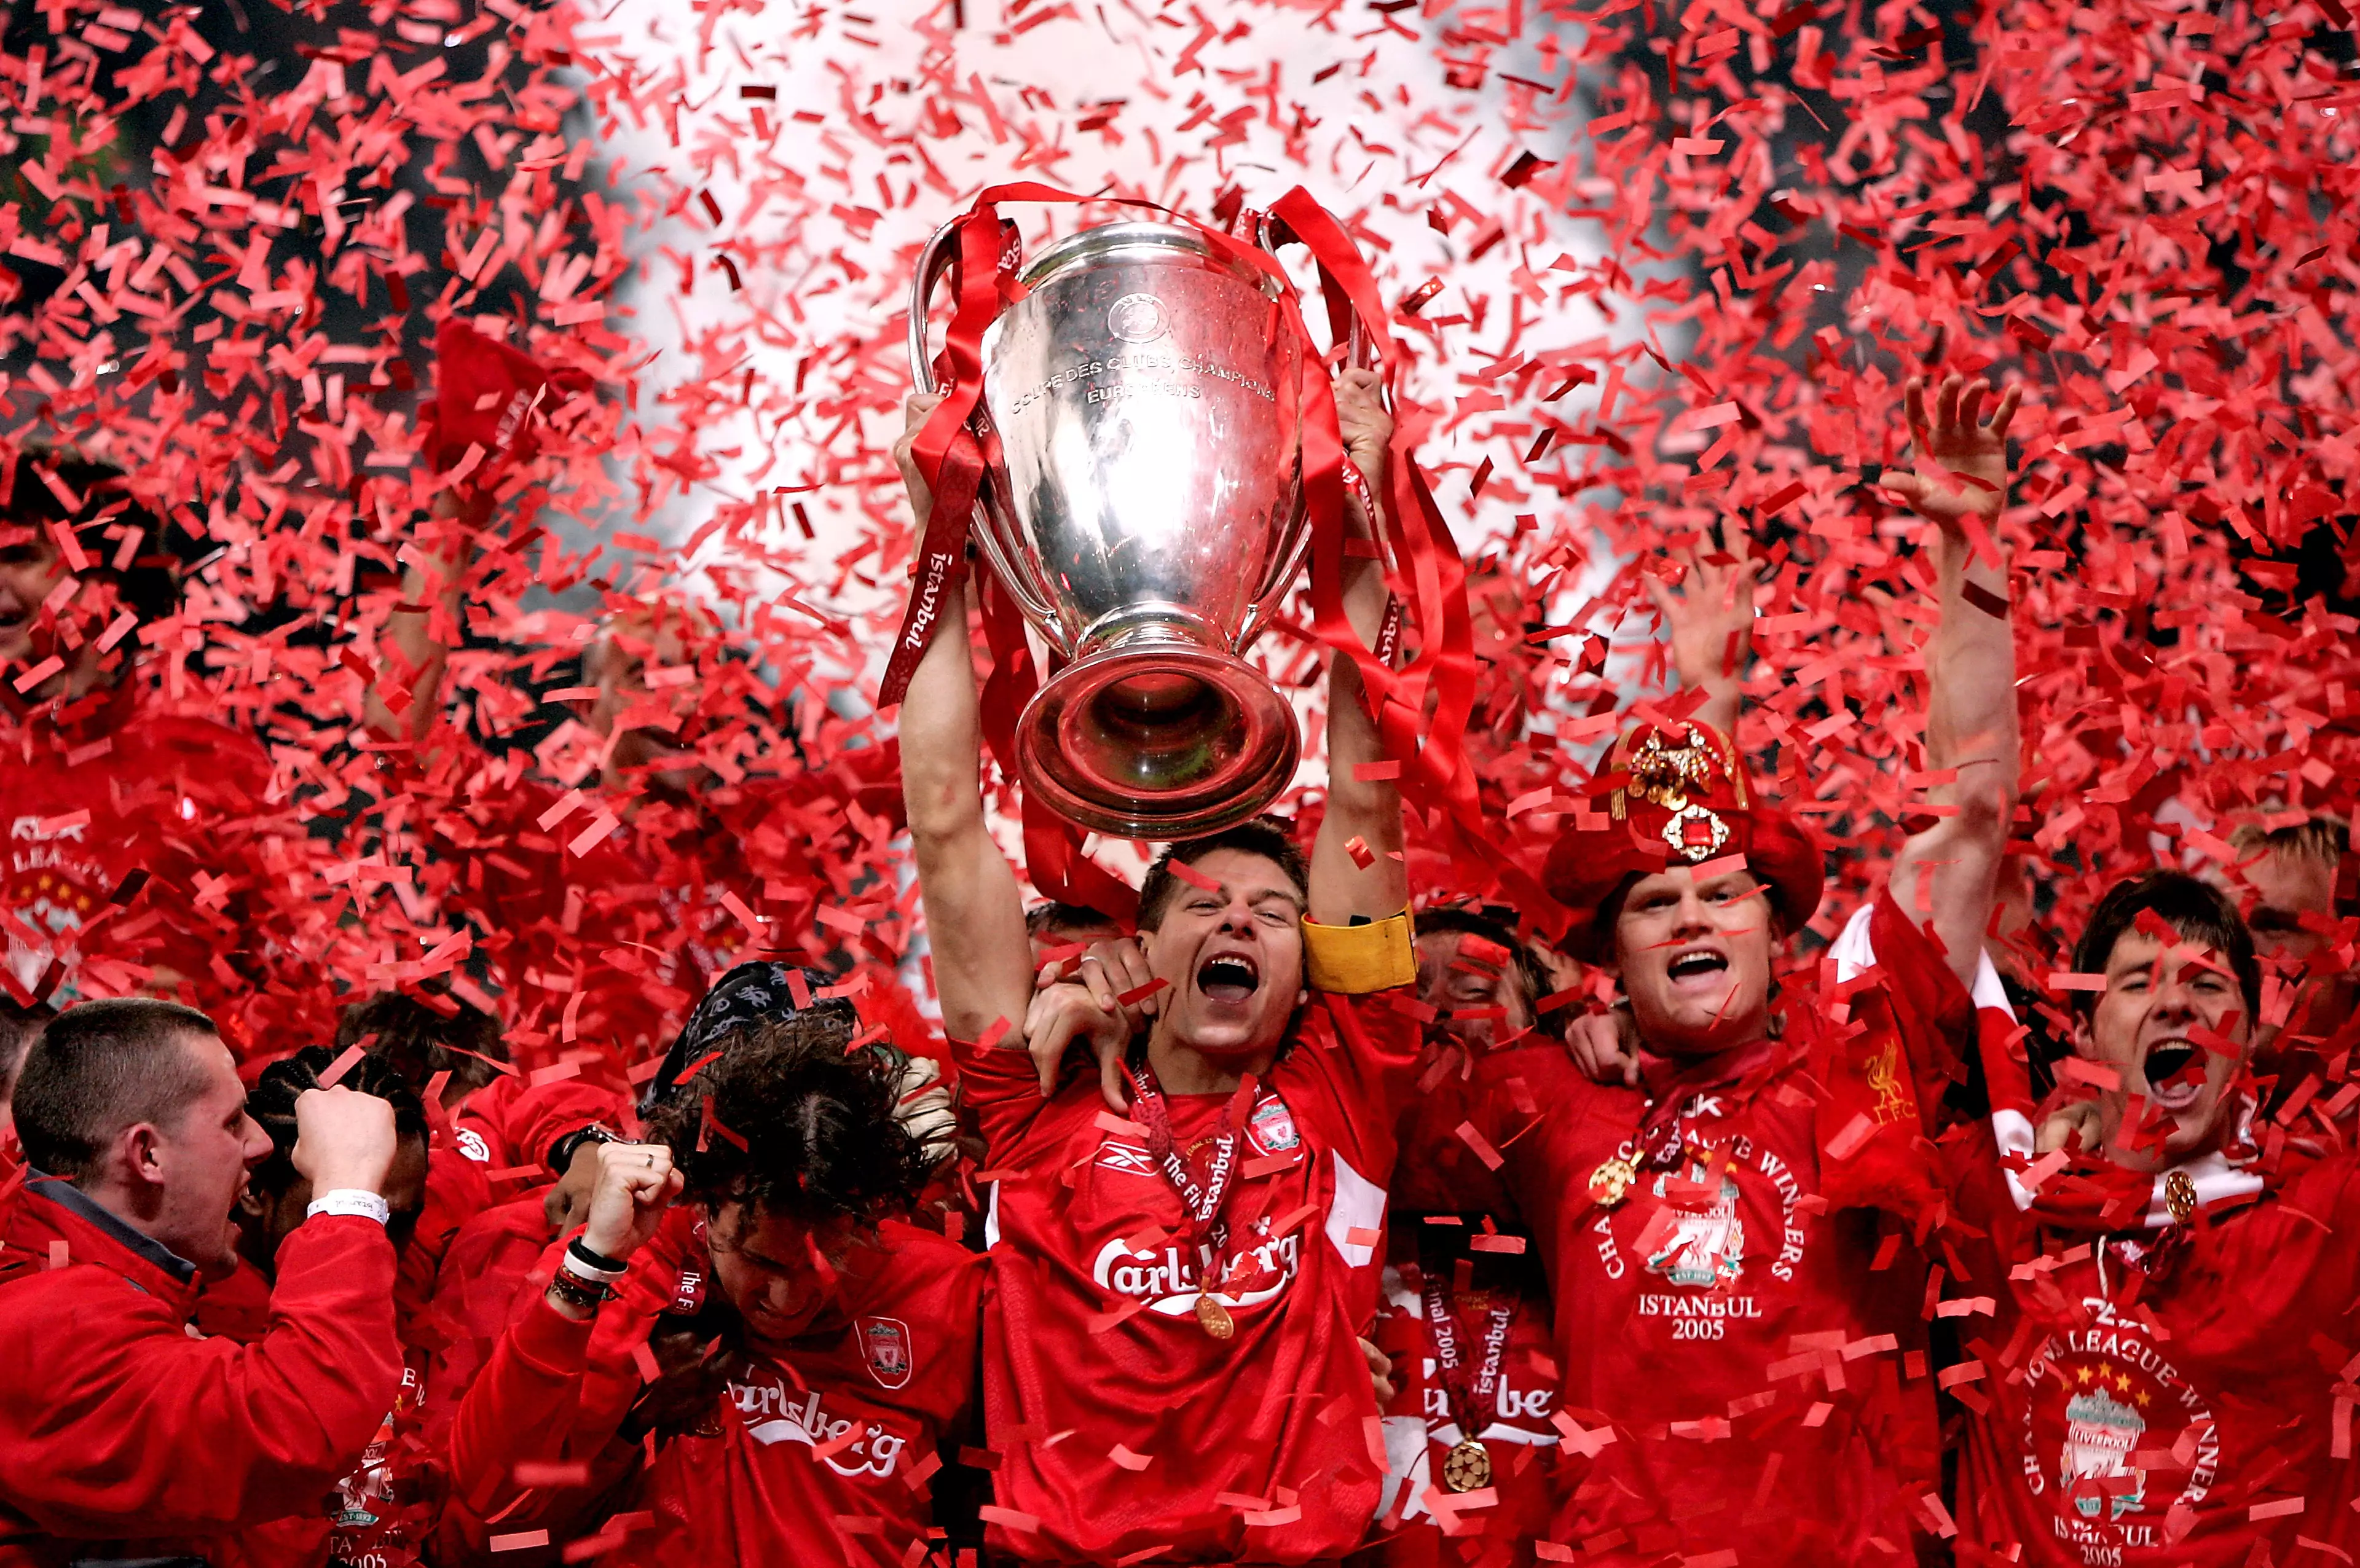 Gerrard inspired Liverpool to Champions League victoy in 2005, but never clinched English football's top honour. (Image